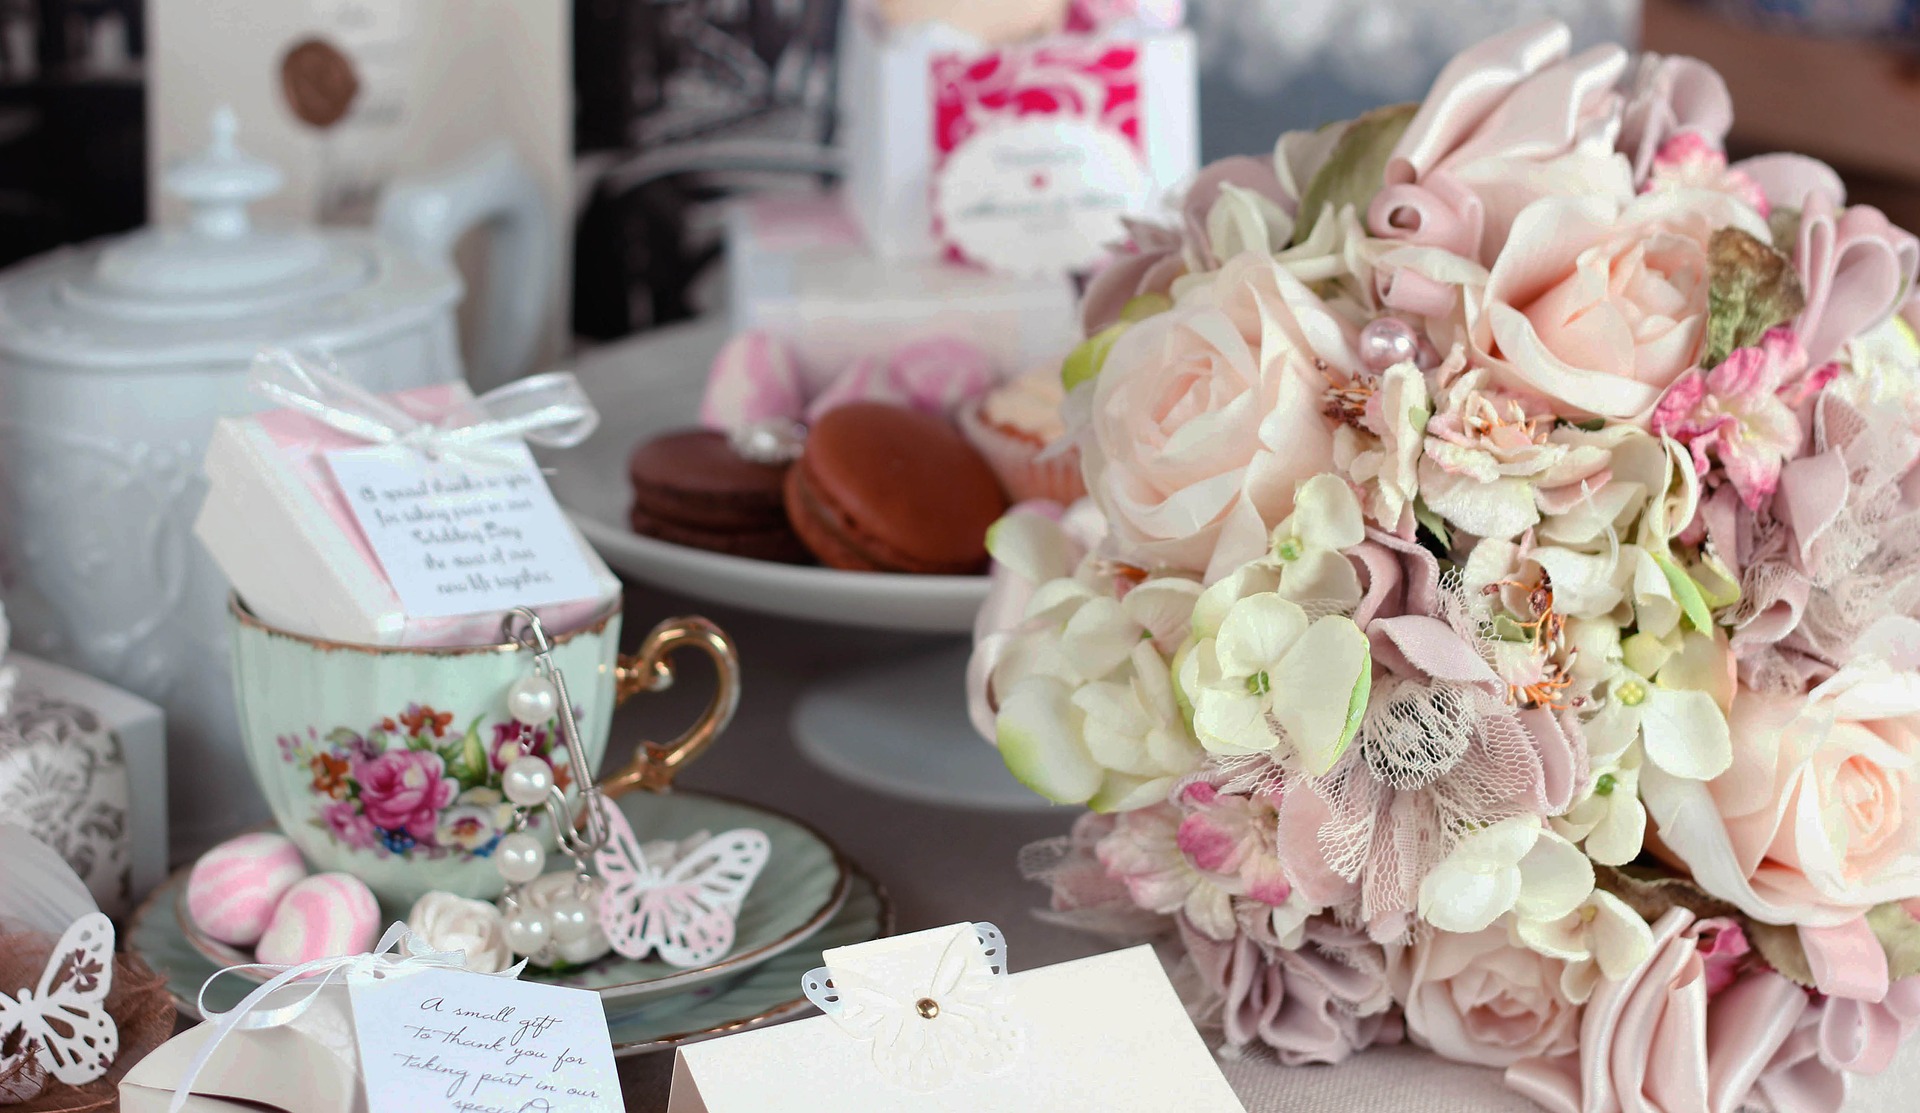 The Complete Guide to a Fabulous Bridal Shower - The Wedding Club